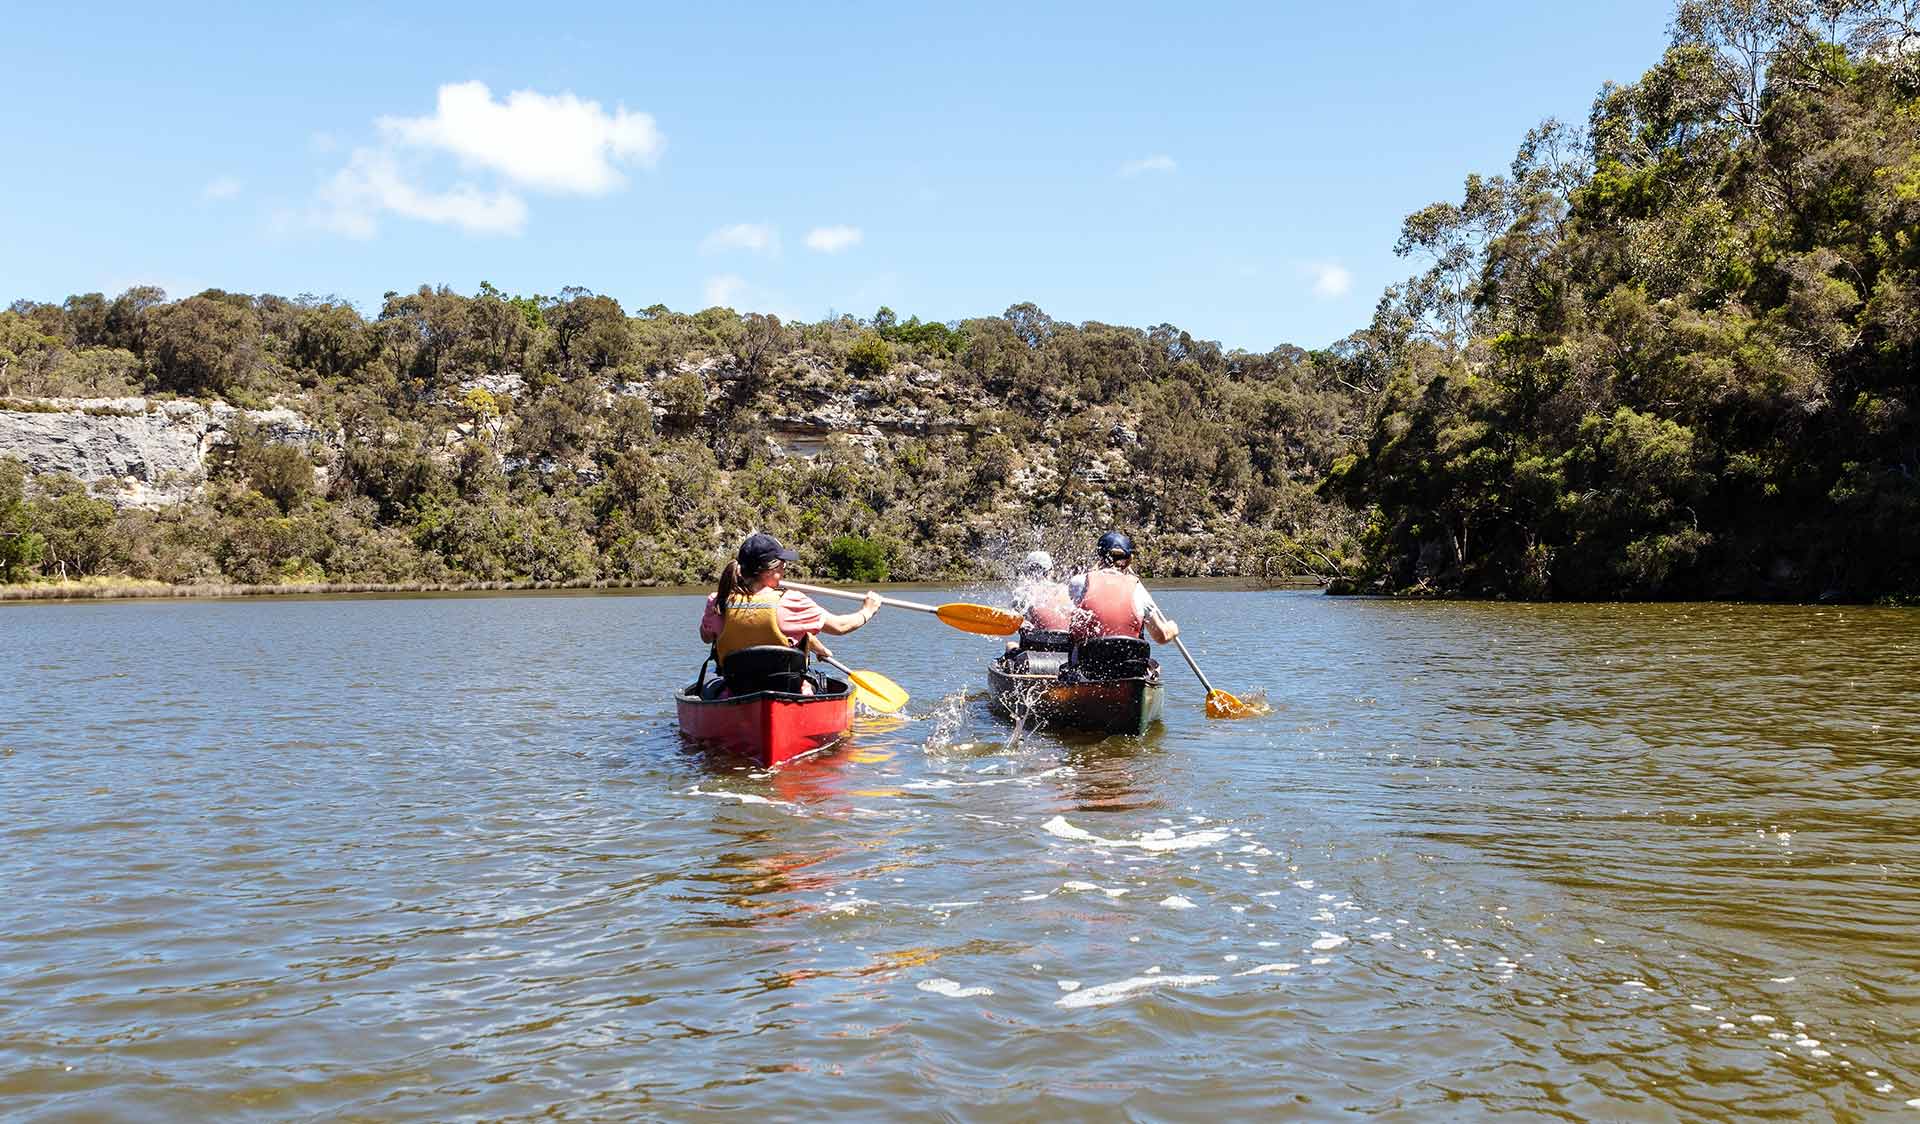 A woman playfully splashing a friend in another canoe with her paddle on the Glenelg River